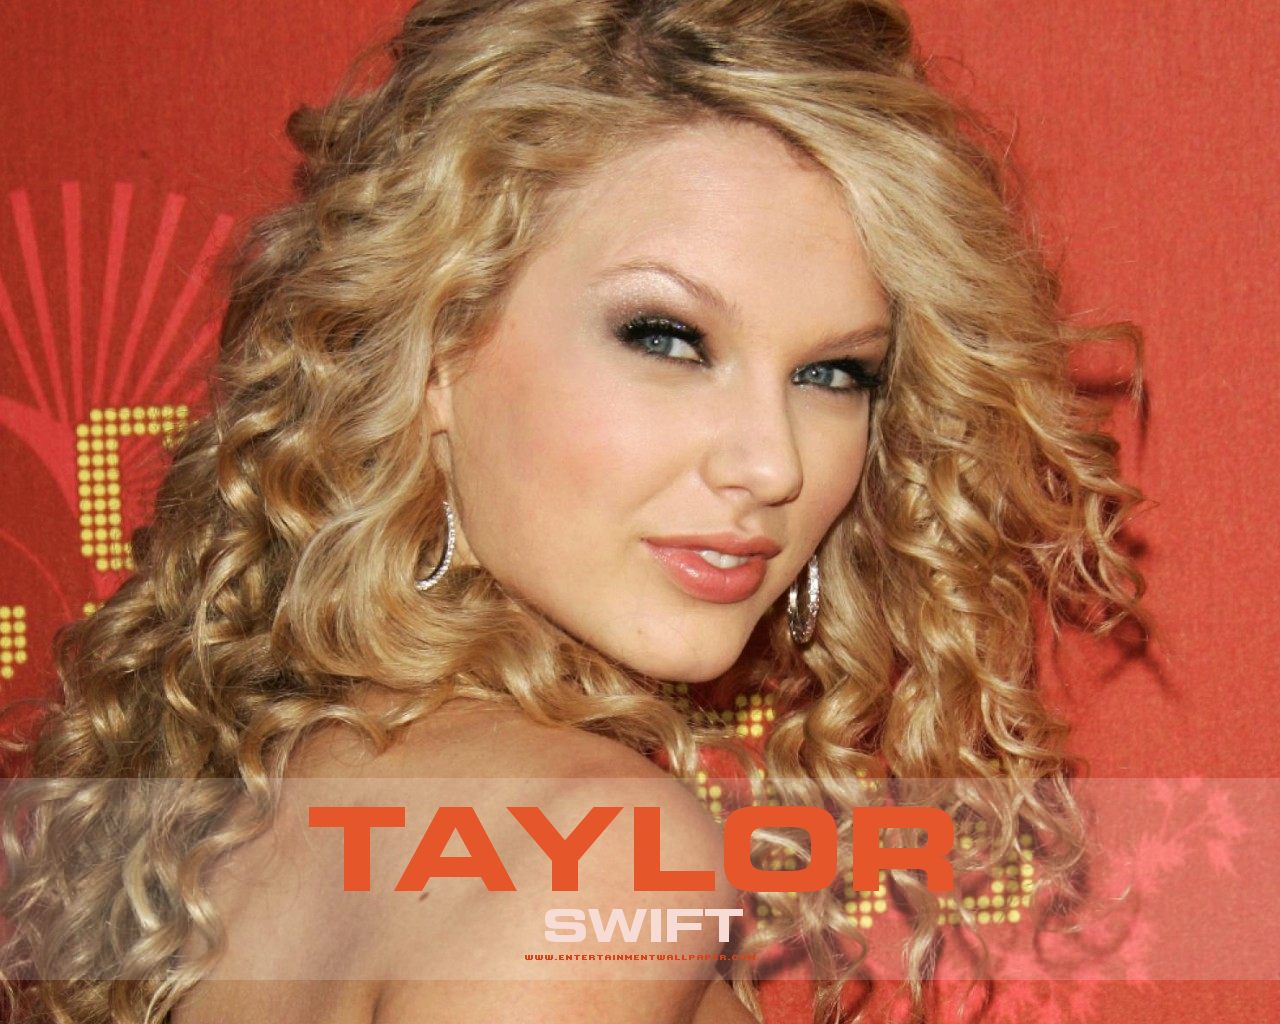 Taylor Swift - Images